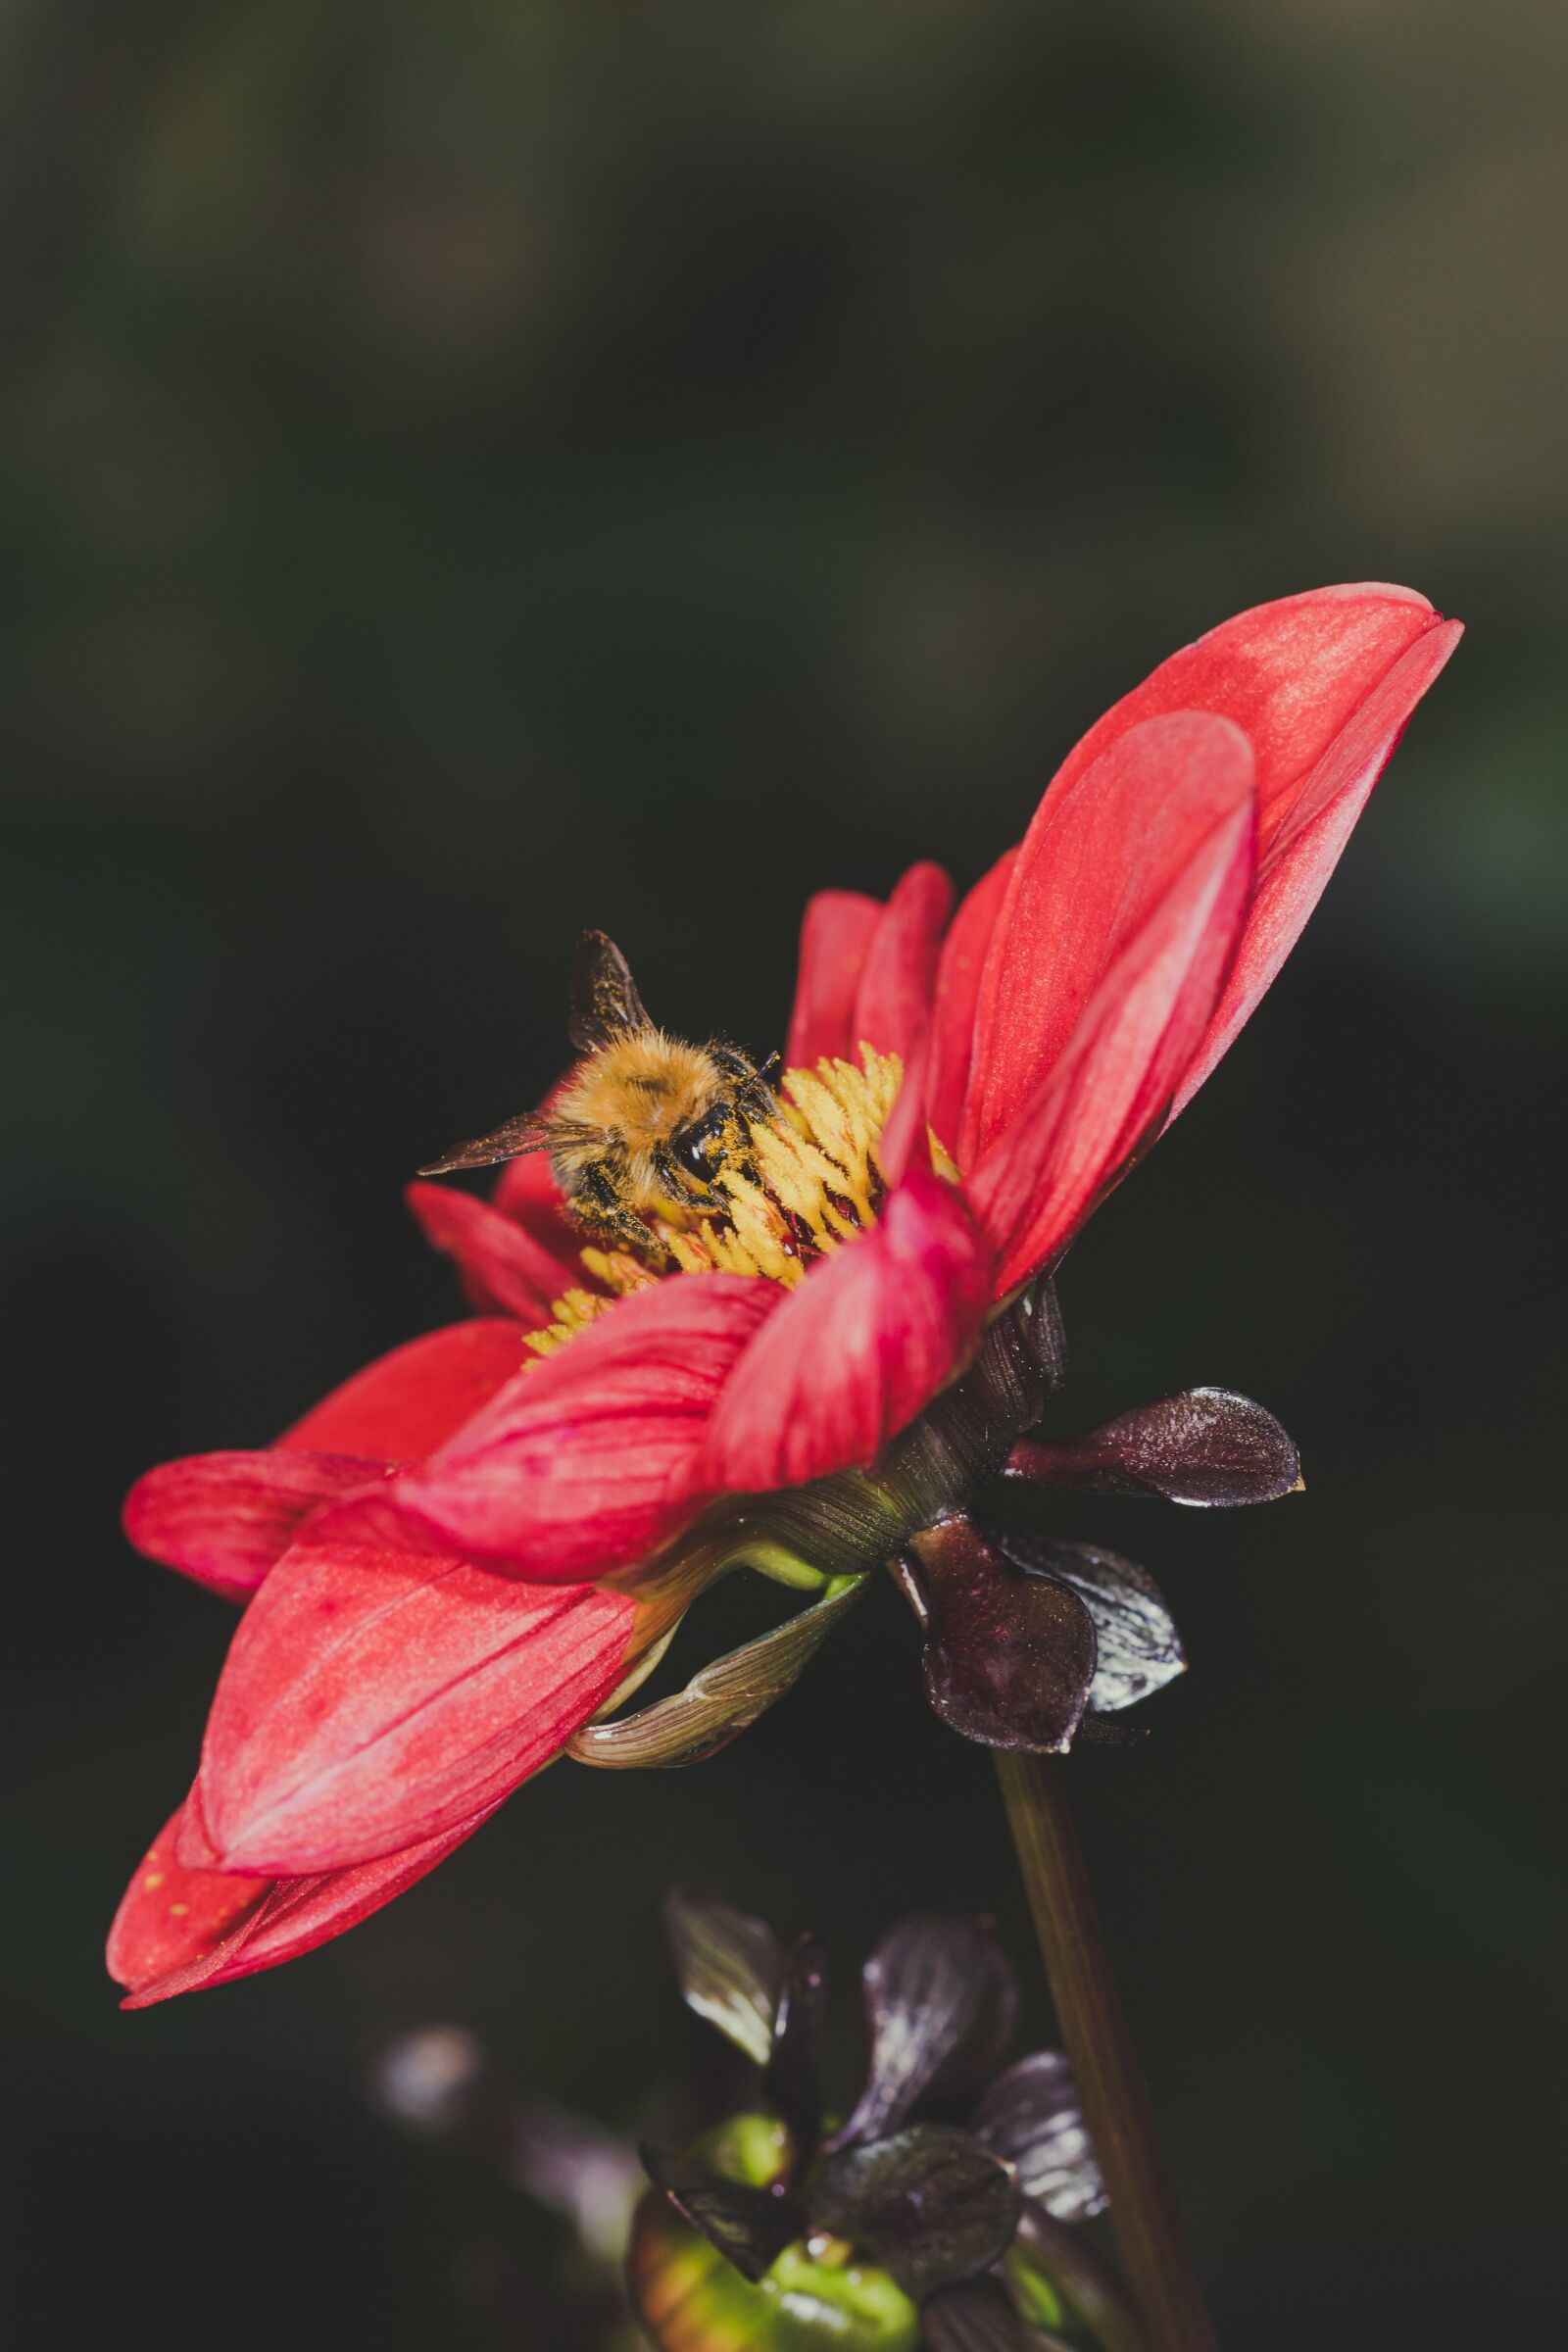 105mm F2.8 sample photo. Flower, bumblebee, close up photography